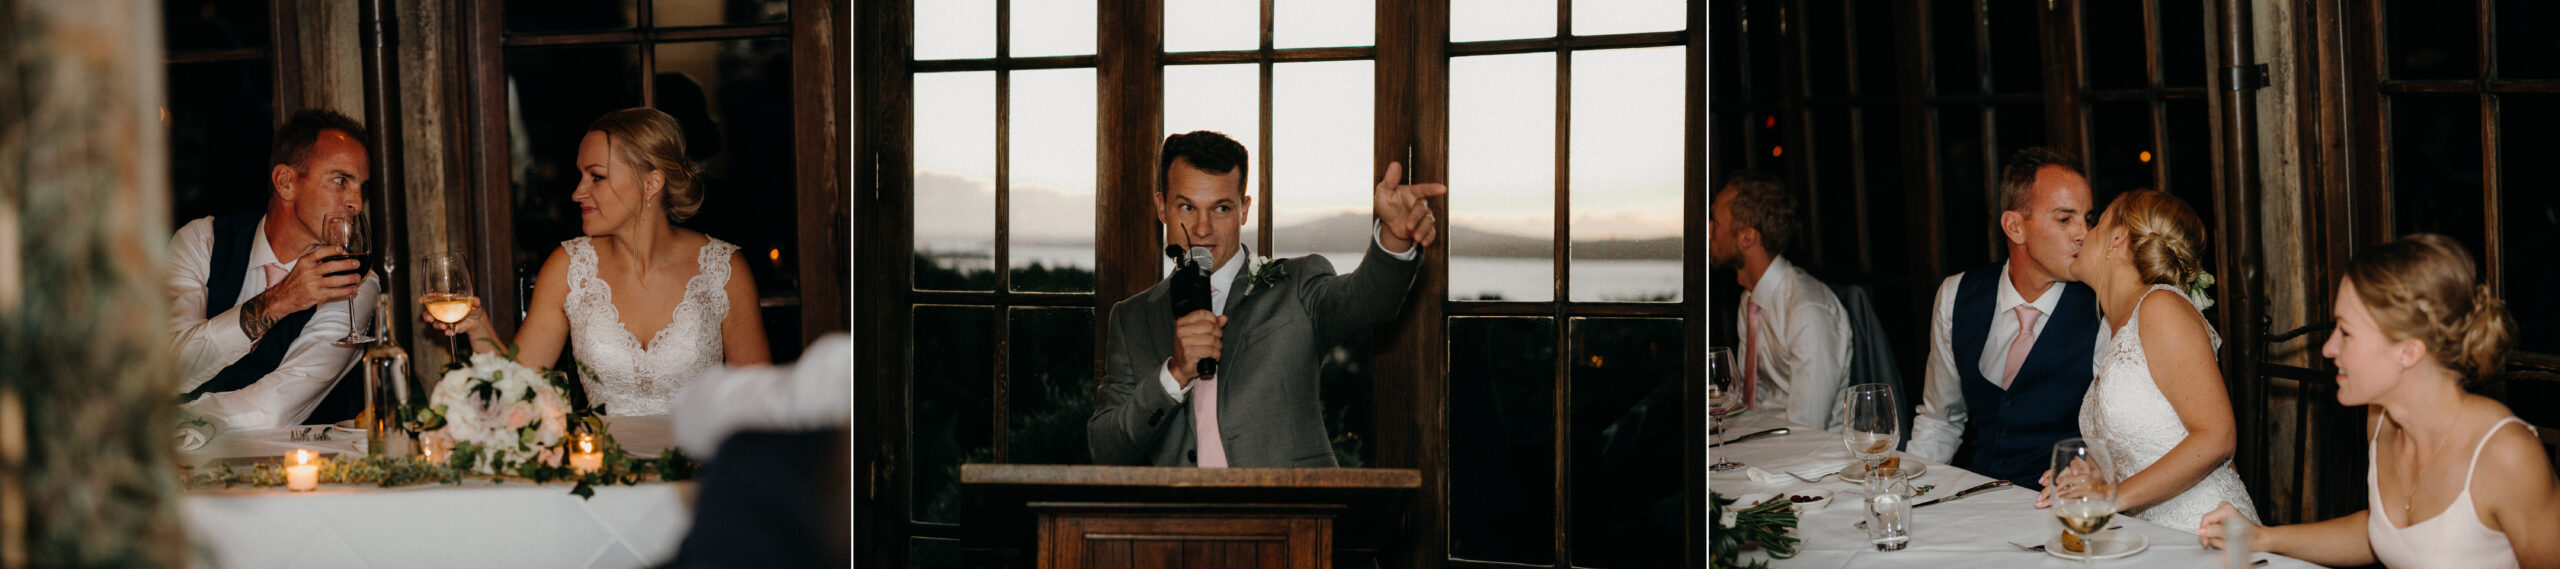 Best man wedding reception speech about Bride and Groom at Mudbrick Waiheke Island Auckland, photo by Sarah Weber Photography